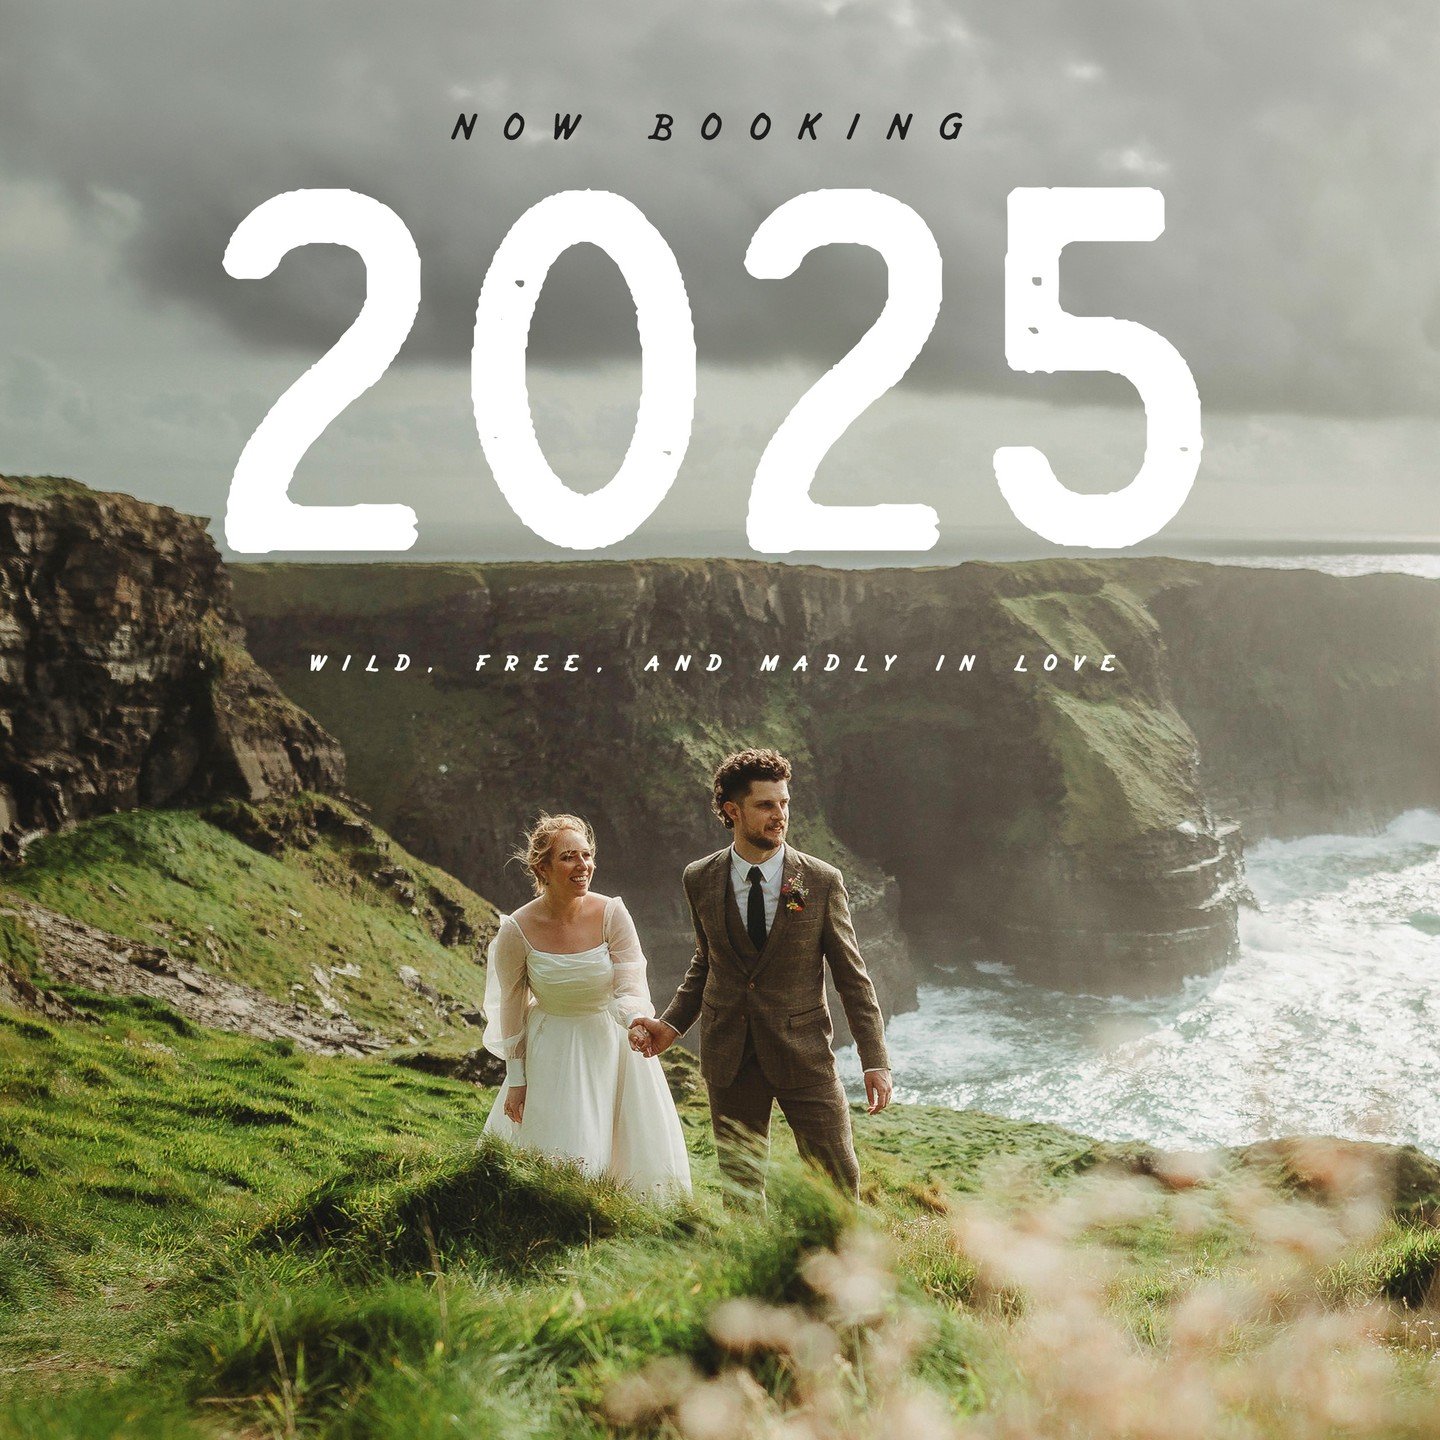 2025 Bookings Now Open!

Still specializing in weddings, but increasingly drawn to adventurous elopements here in Ireland. I aim to broaden my horizons while maintaining a commitment to weddings. Though I'll be taking limited bookings for weddings, I